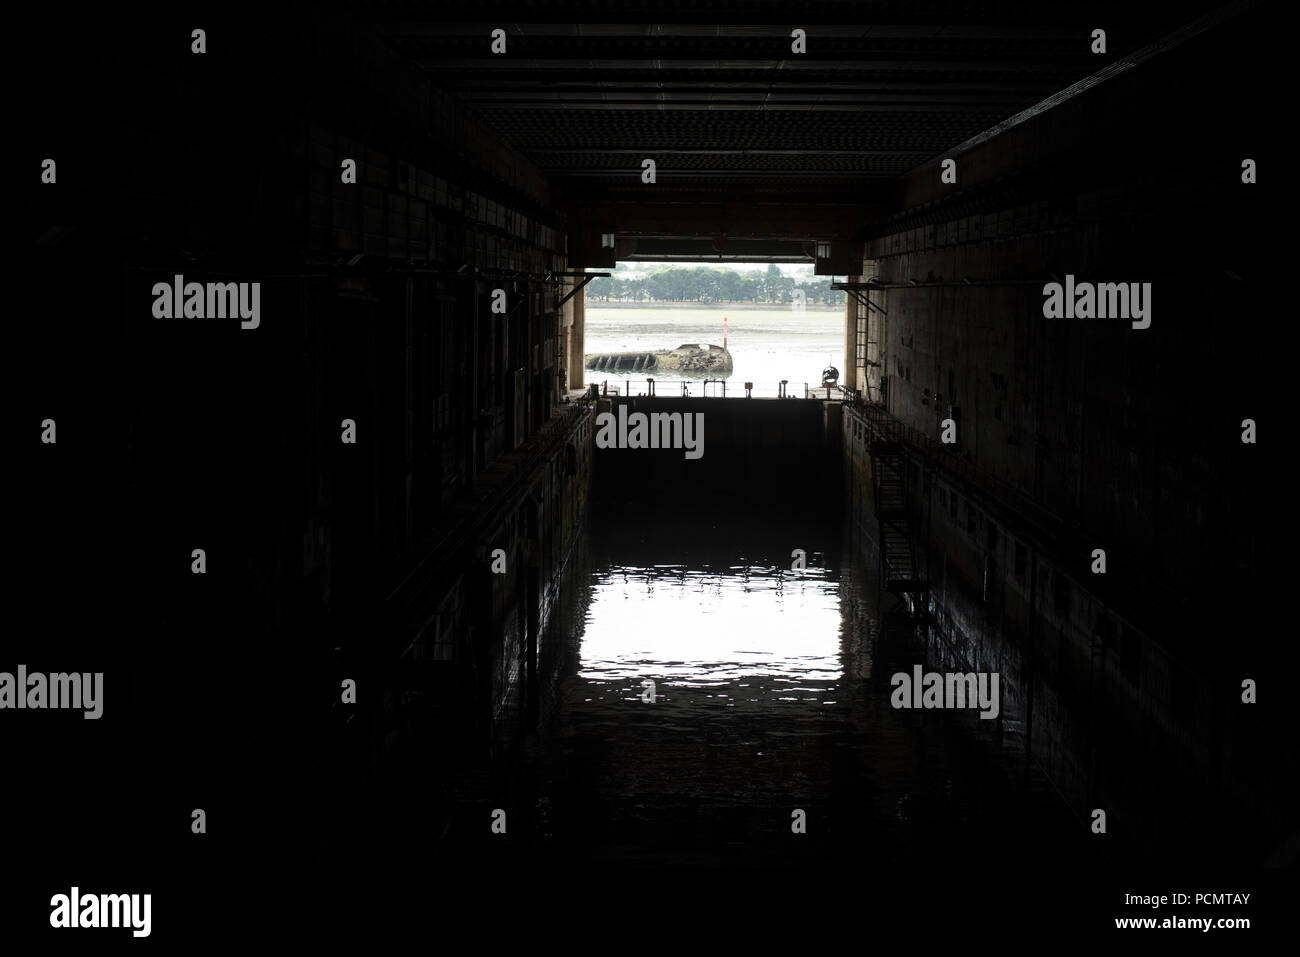 19.07.2018, France, Brittany, Lorient: A dock in the former German submarine bunker Keroman 3. The submarine bunkers in Lorient were built during the Second World War on behalf of the Wehrmacht under the direction of the organization Todt (OT). Photo: Ralf Hirschberger / dpa | usage worldwide Stock Photo